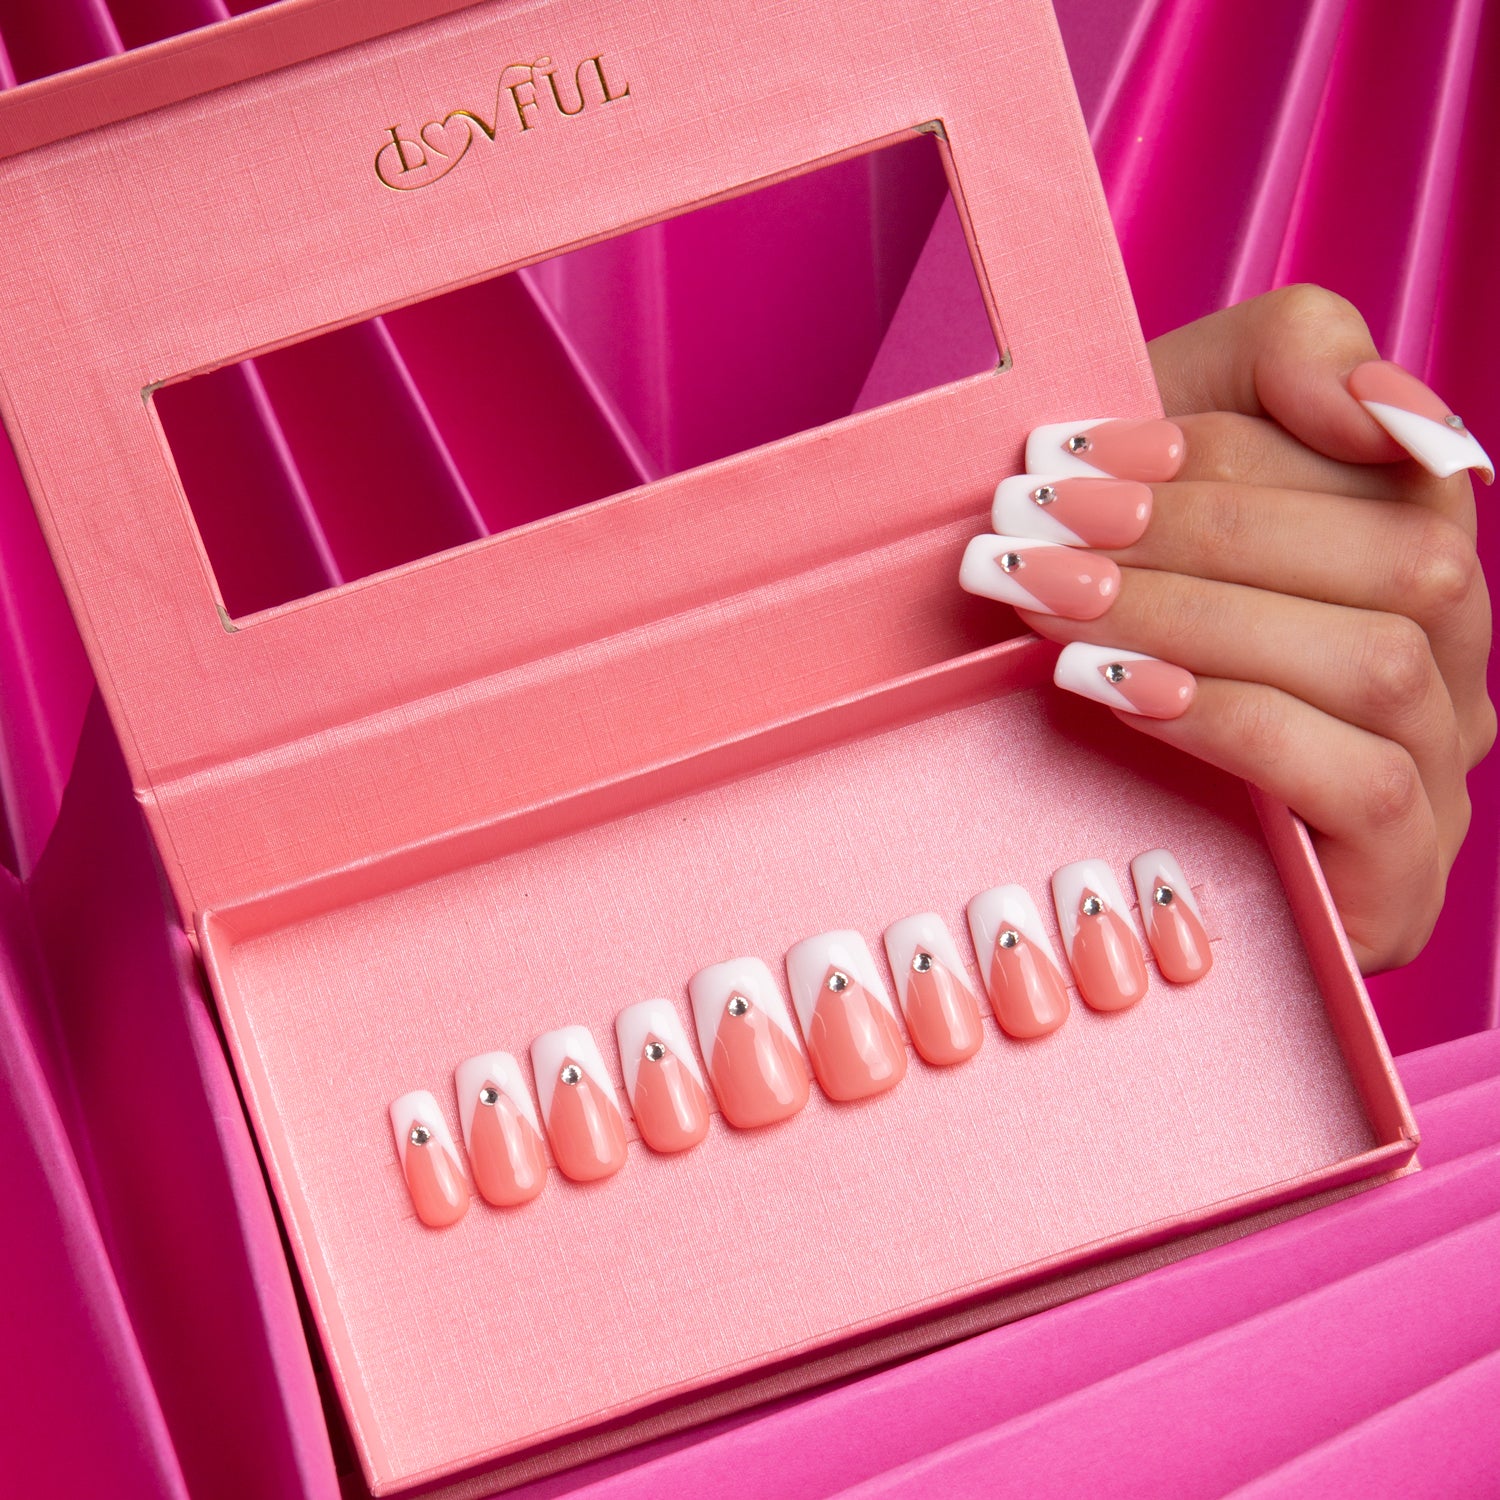 Lovful's Eternal Polaris Press-On Nails displayed in a pink box, featuring white triangle French tips and rhinestones. A hand with the same nail design is shown, set against a pink background.